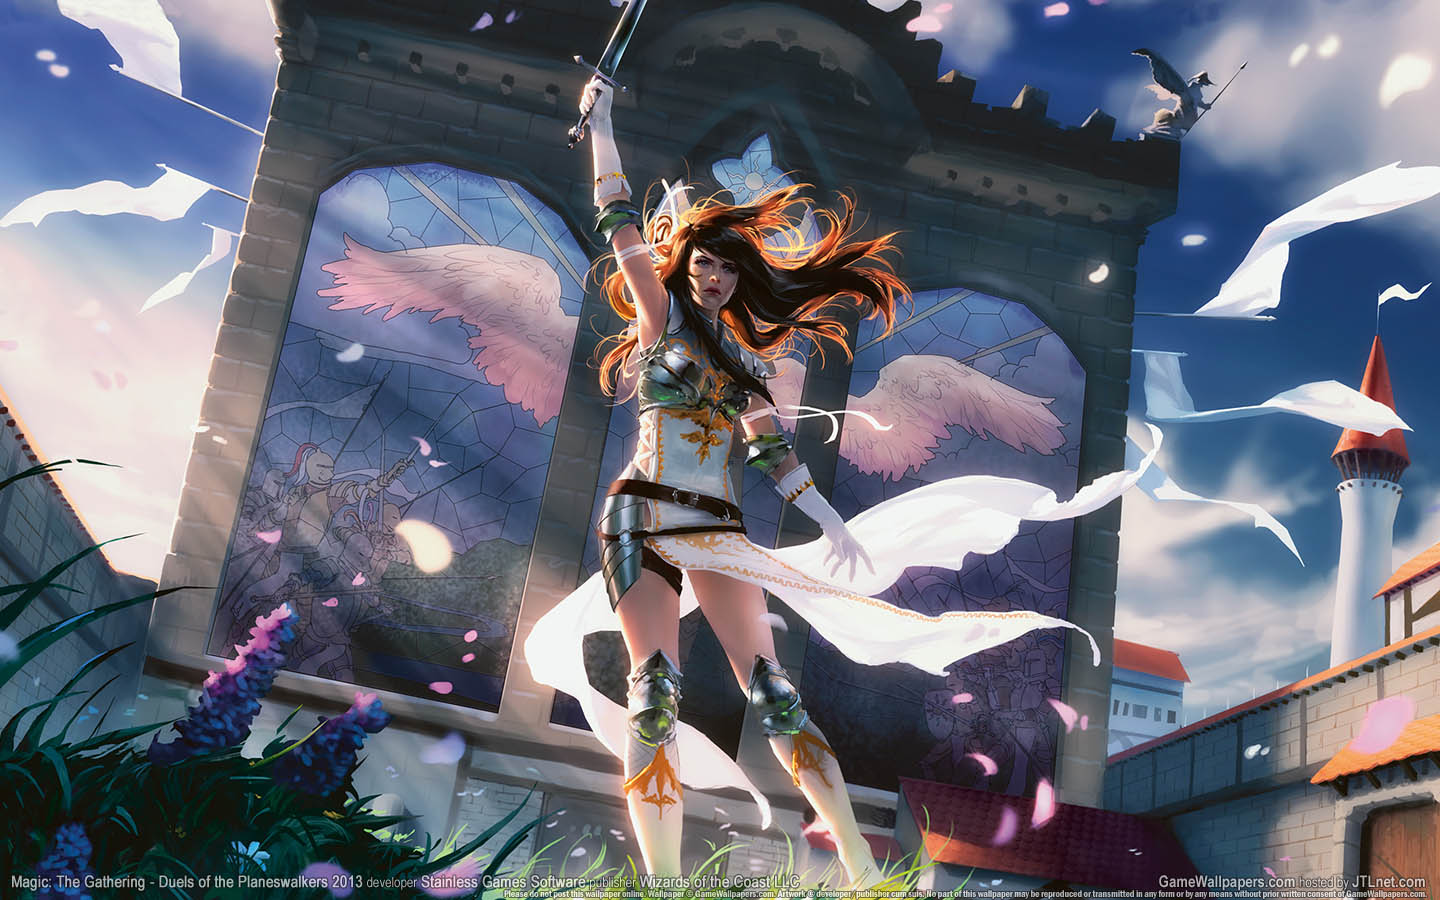 Magic: The Gathering - Duels of the Planeswalkers 2013 wallpaper 01 1440x900